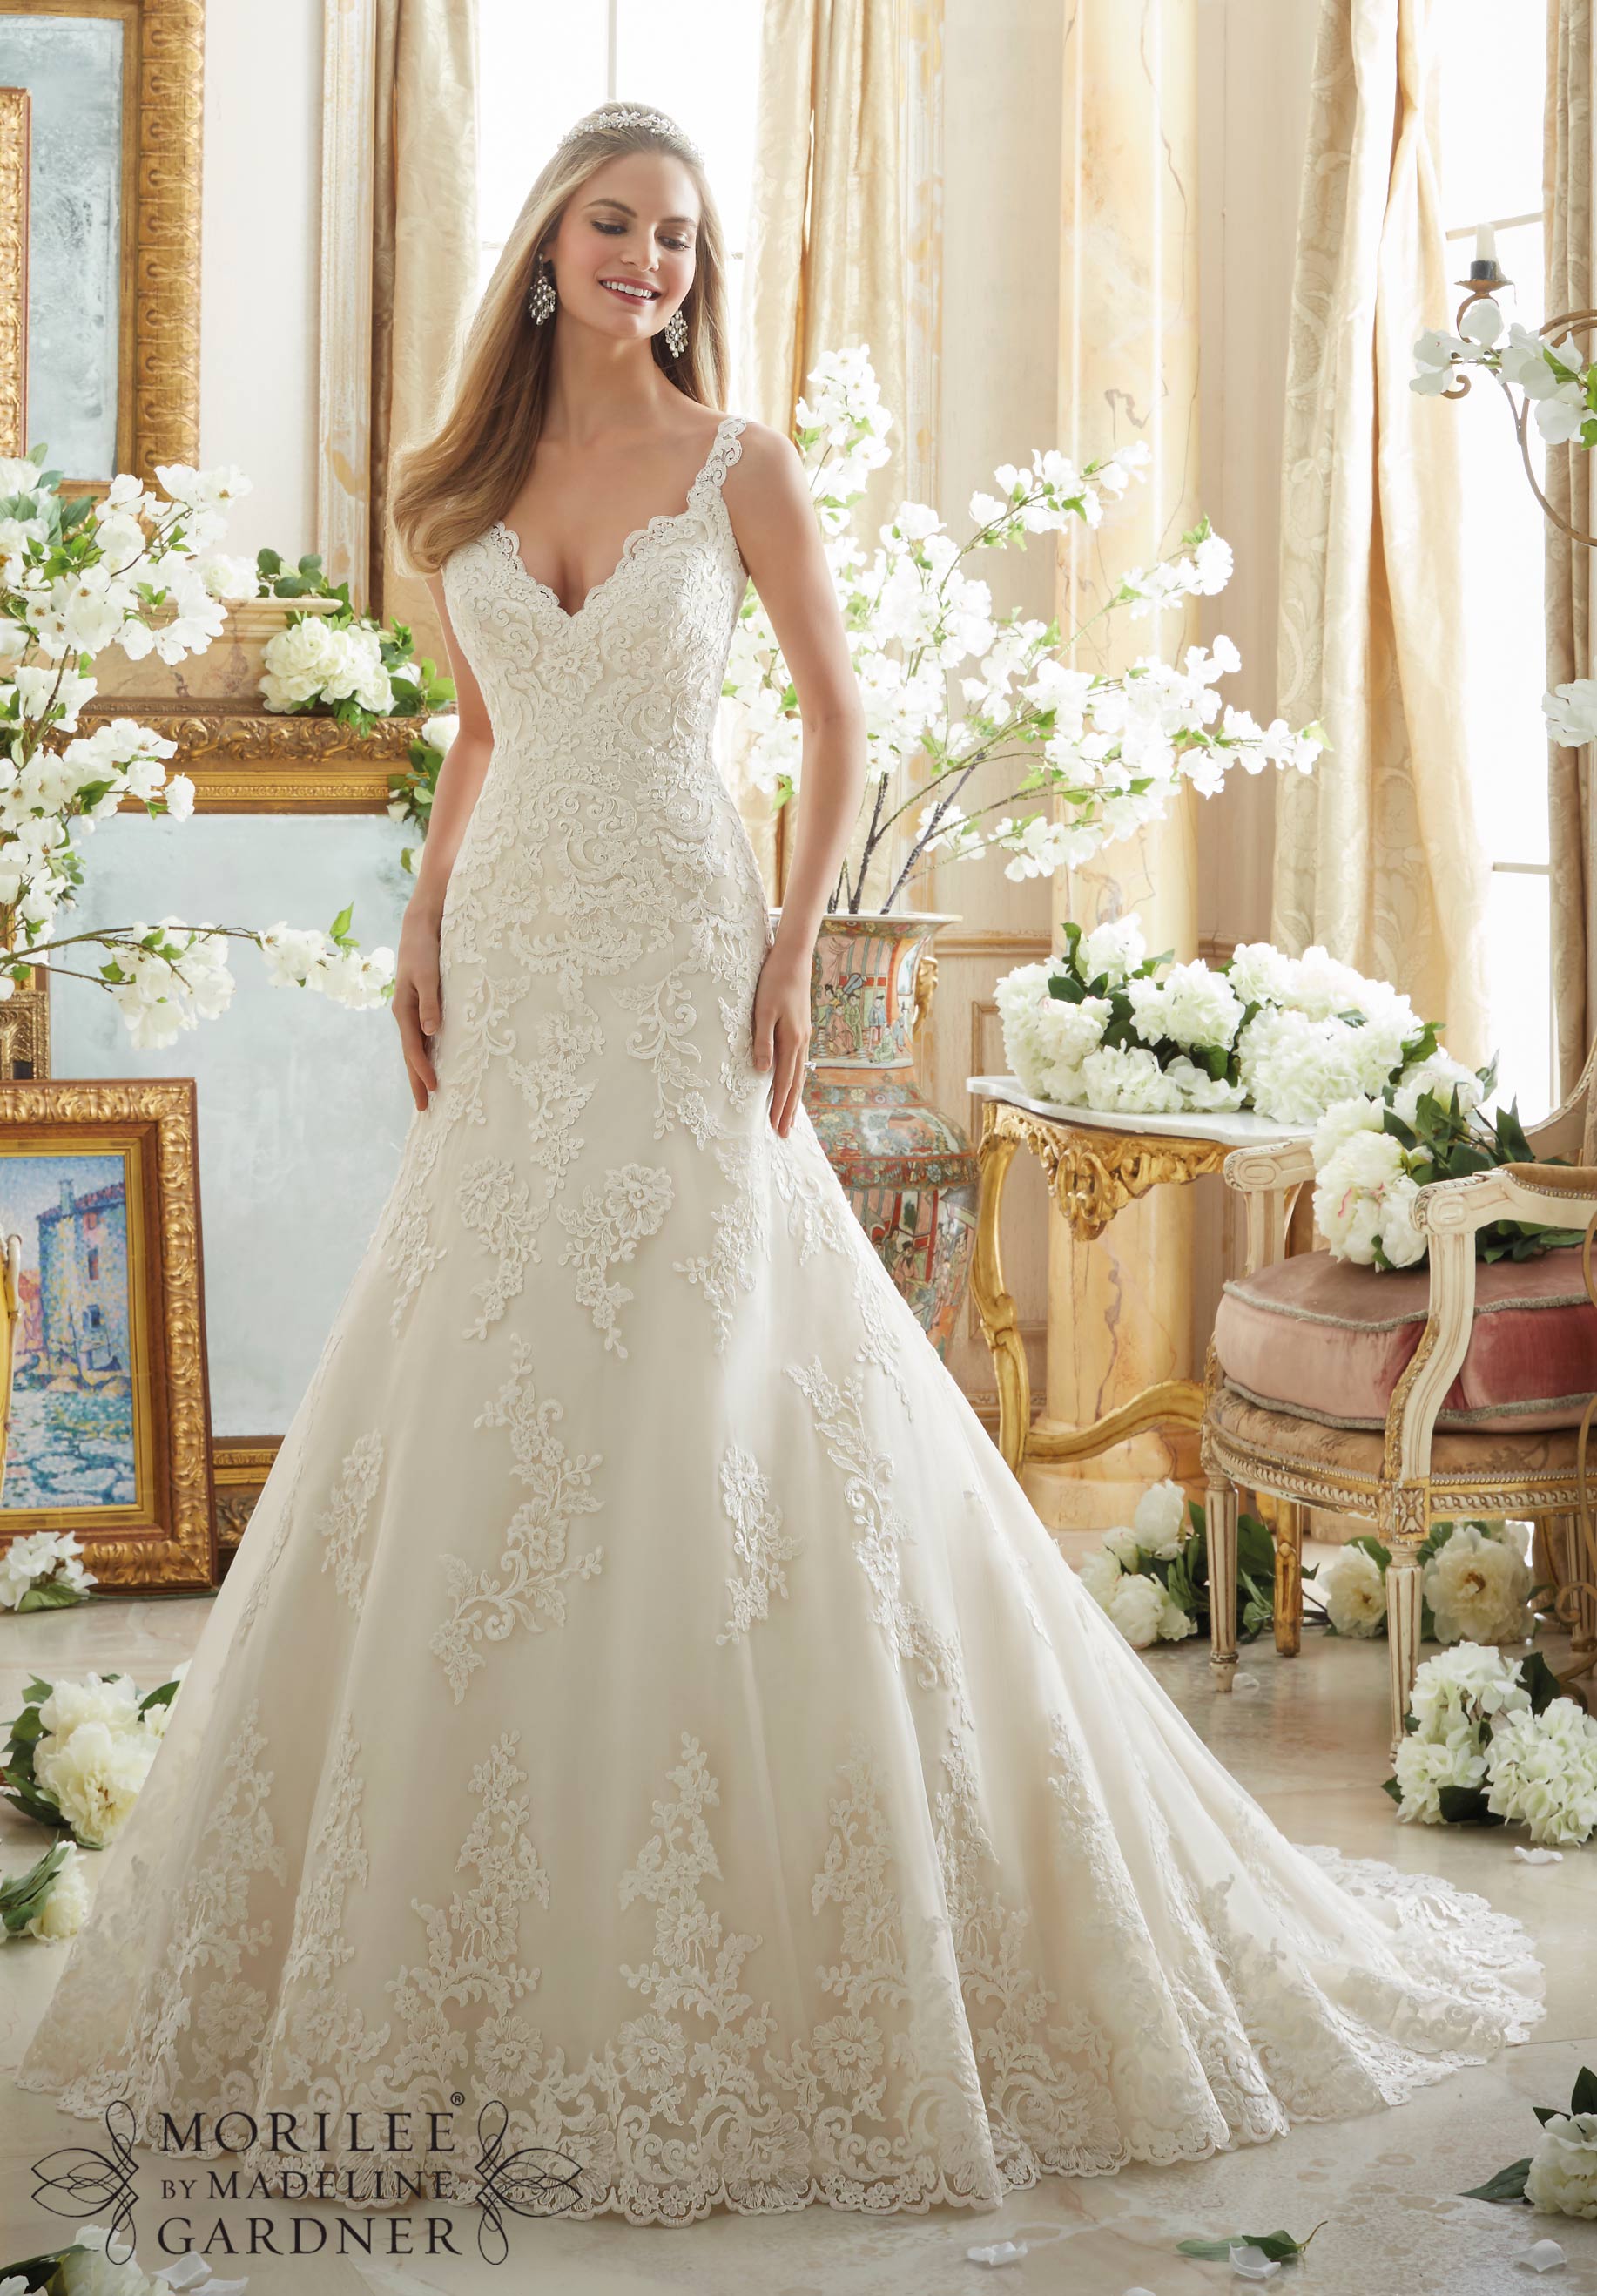 Dress - Mori Lee Bridal FALL 2016 Collection: 2890 - Embroidered Lace ...